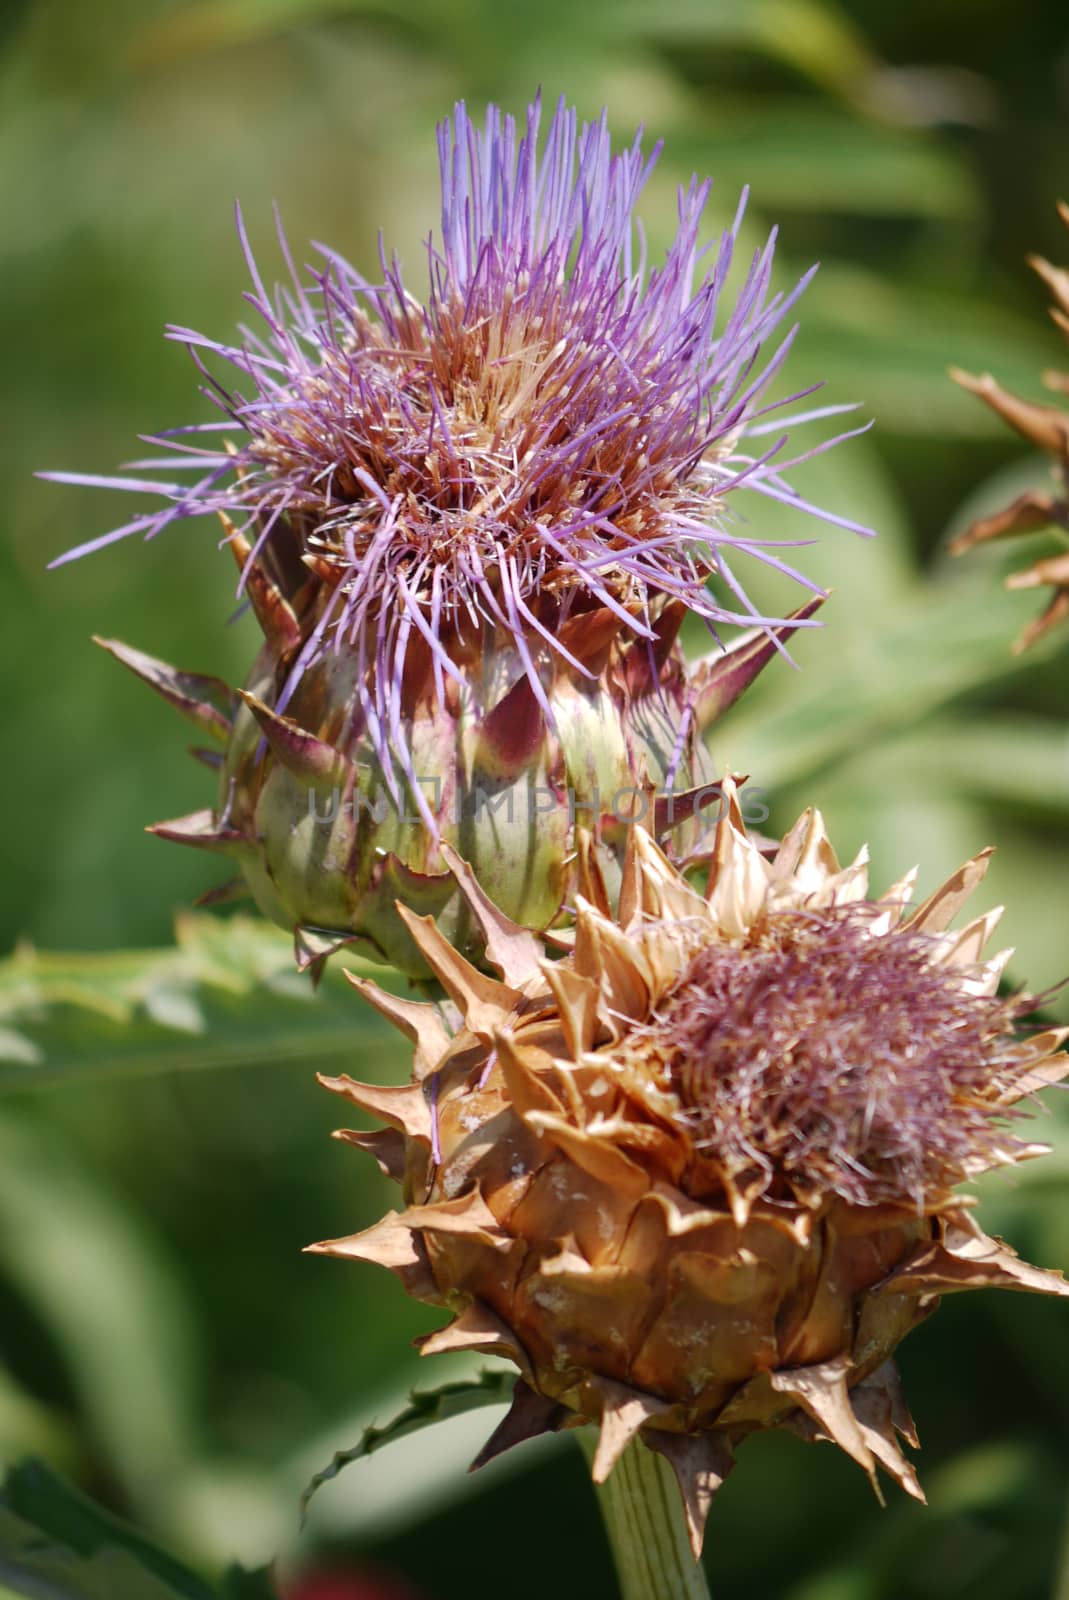 nondescript burdock with dried thorns will not snag by Adamchuk